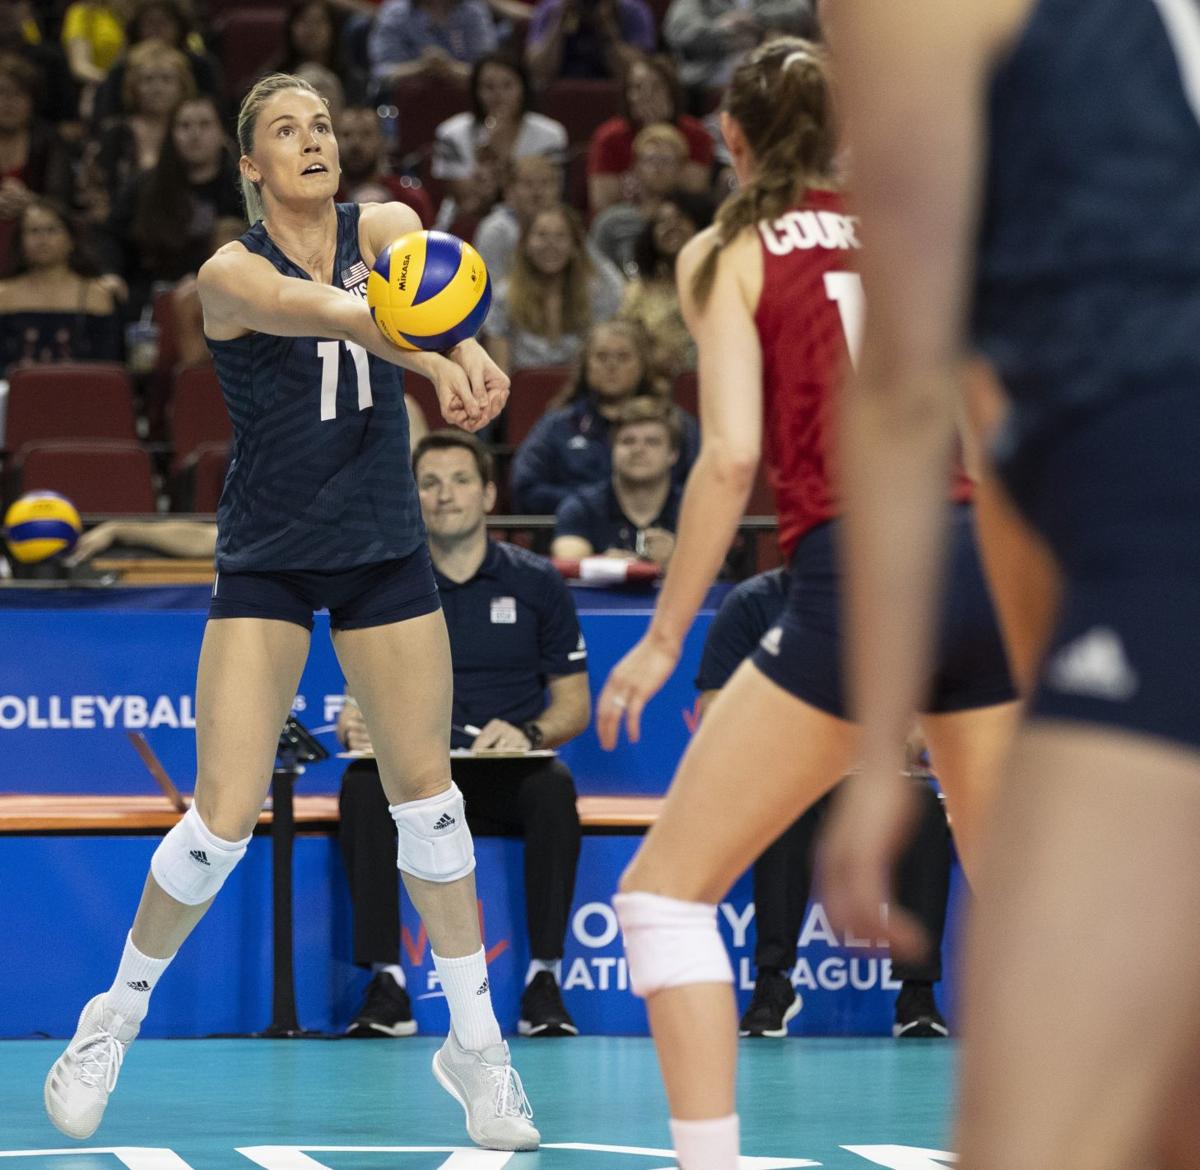 Lincoln draws praise from USA volleyball coach, but team will need to ...